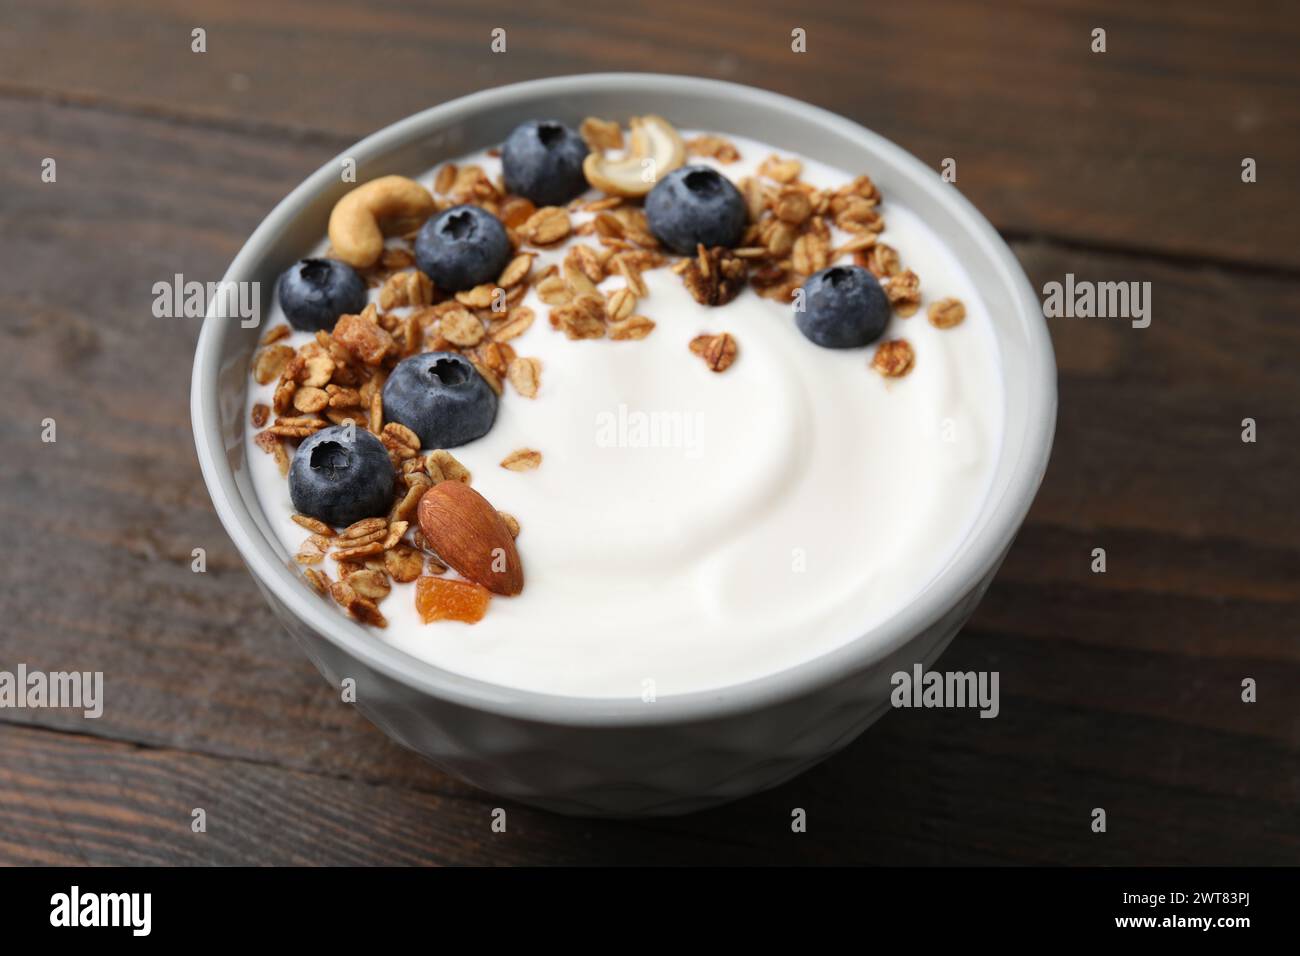 Bowl with yogurt, blueberries and granola on wooden table, closeup Stock Photo